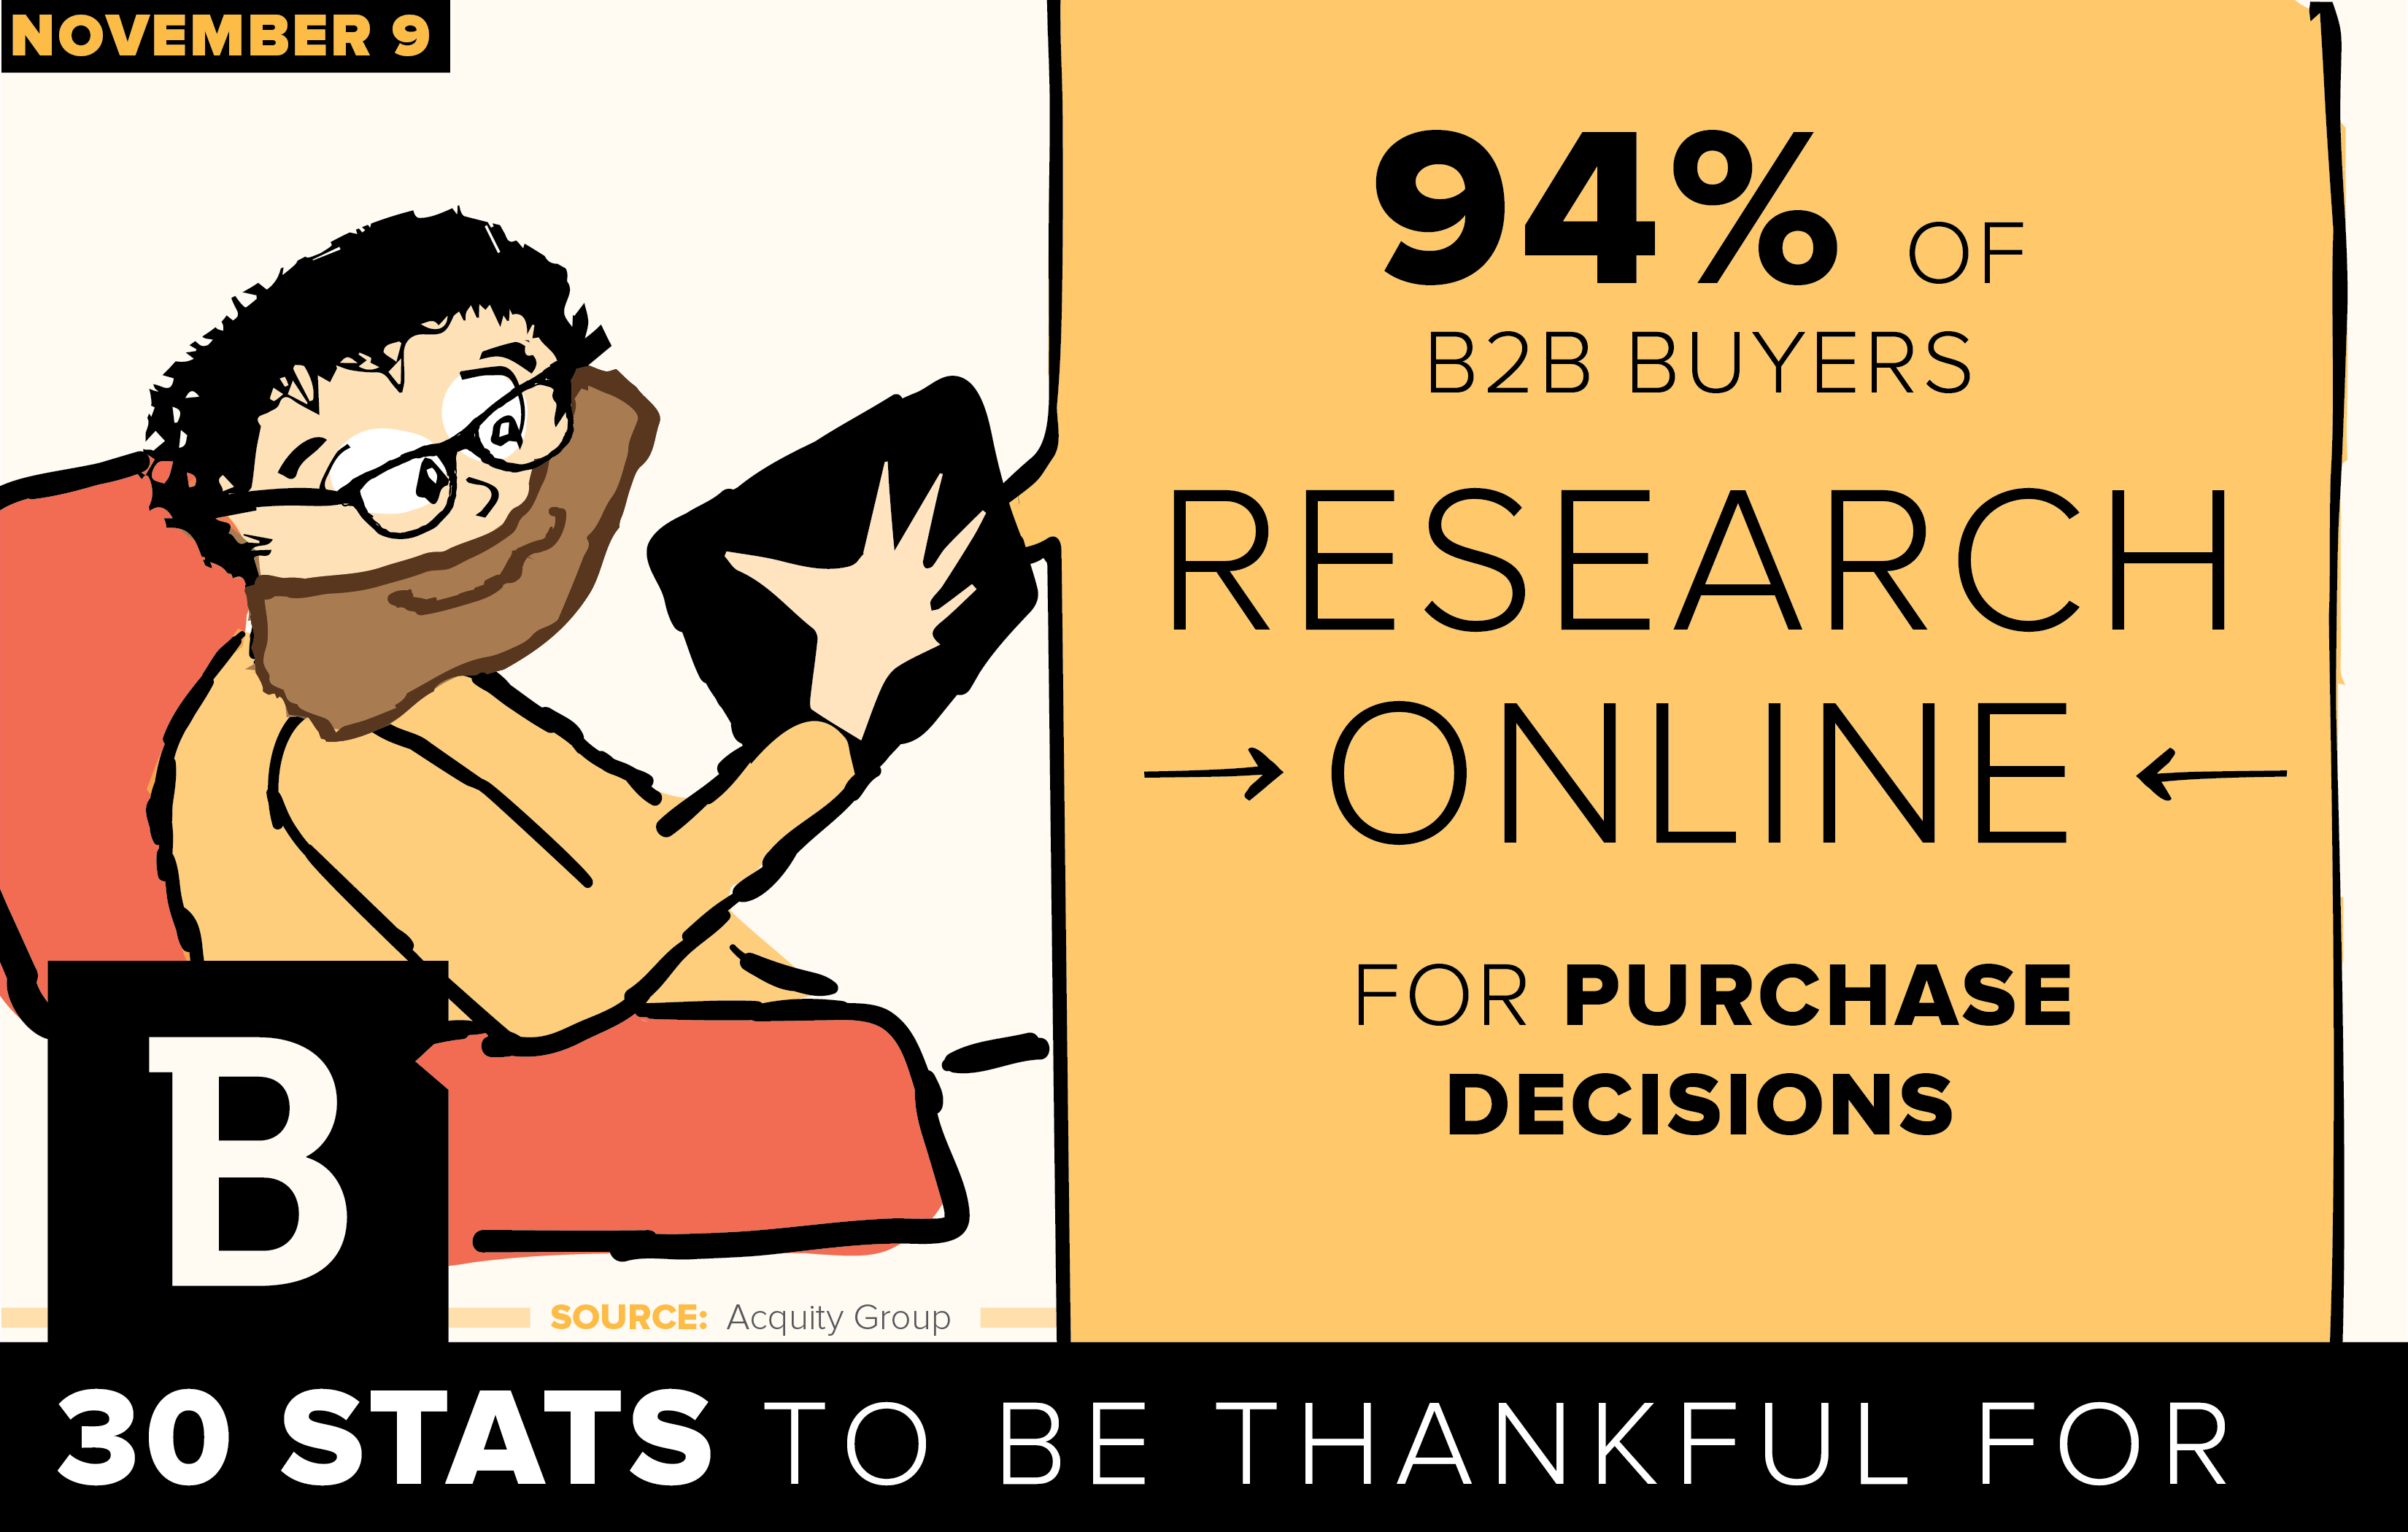 A study by the Acquity Group confirms that buyers are looking at more web resources for end-of-year purchases.